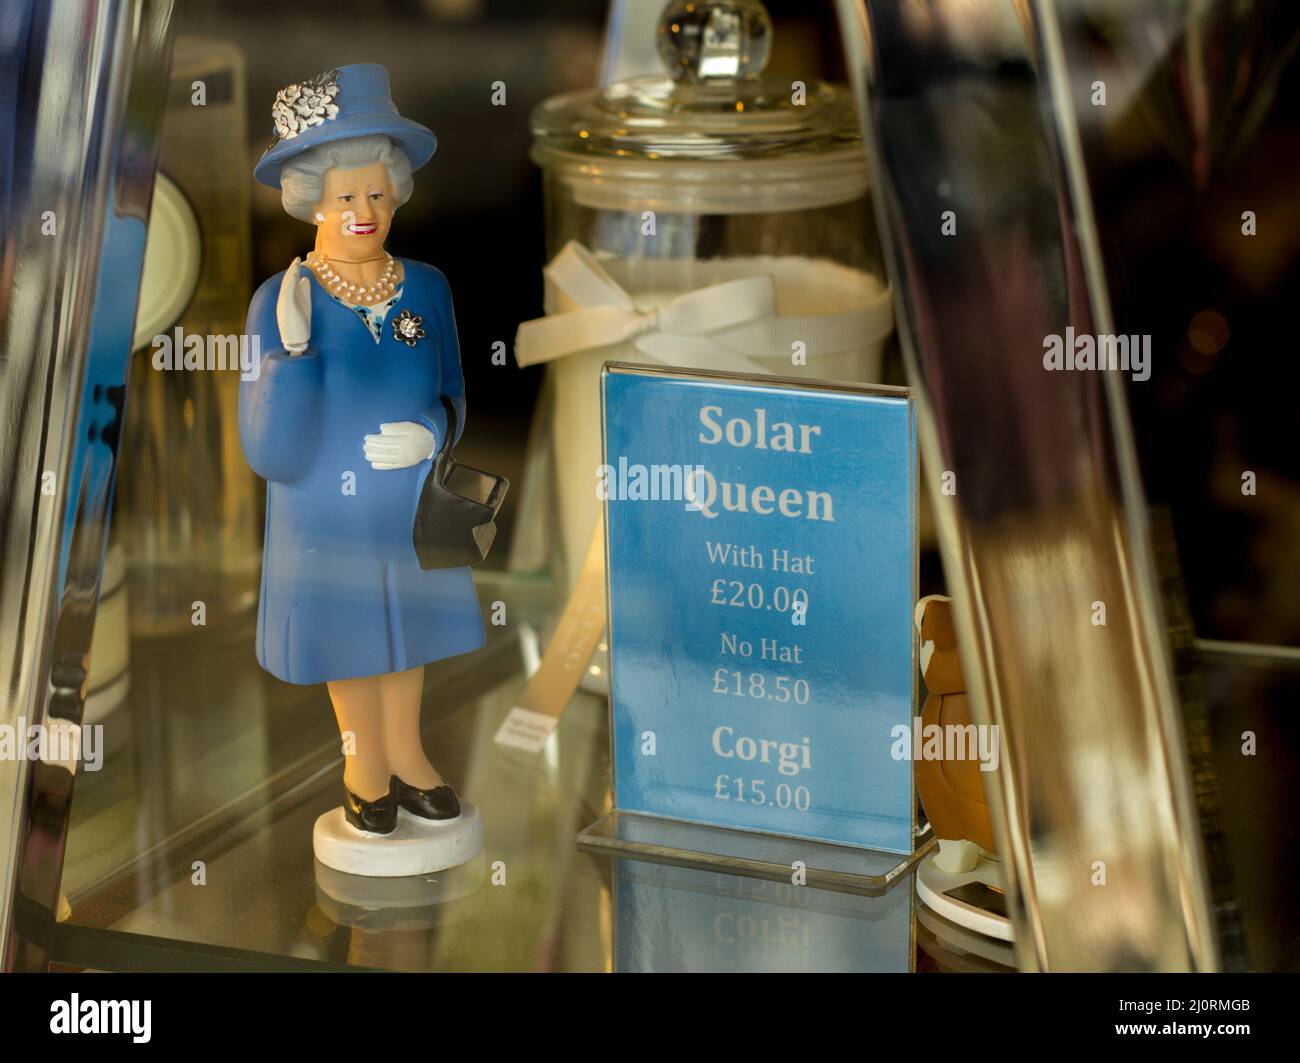 Novelty item 'commemorating' Her Majesty Queen Elizabeth the Second. Platinum Jubilee year 2022 Stock Photo